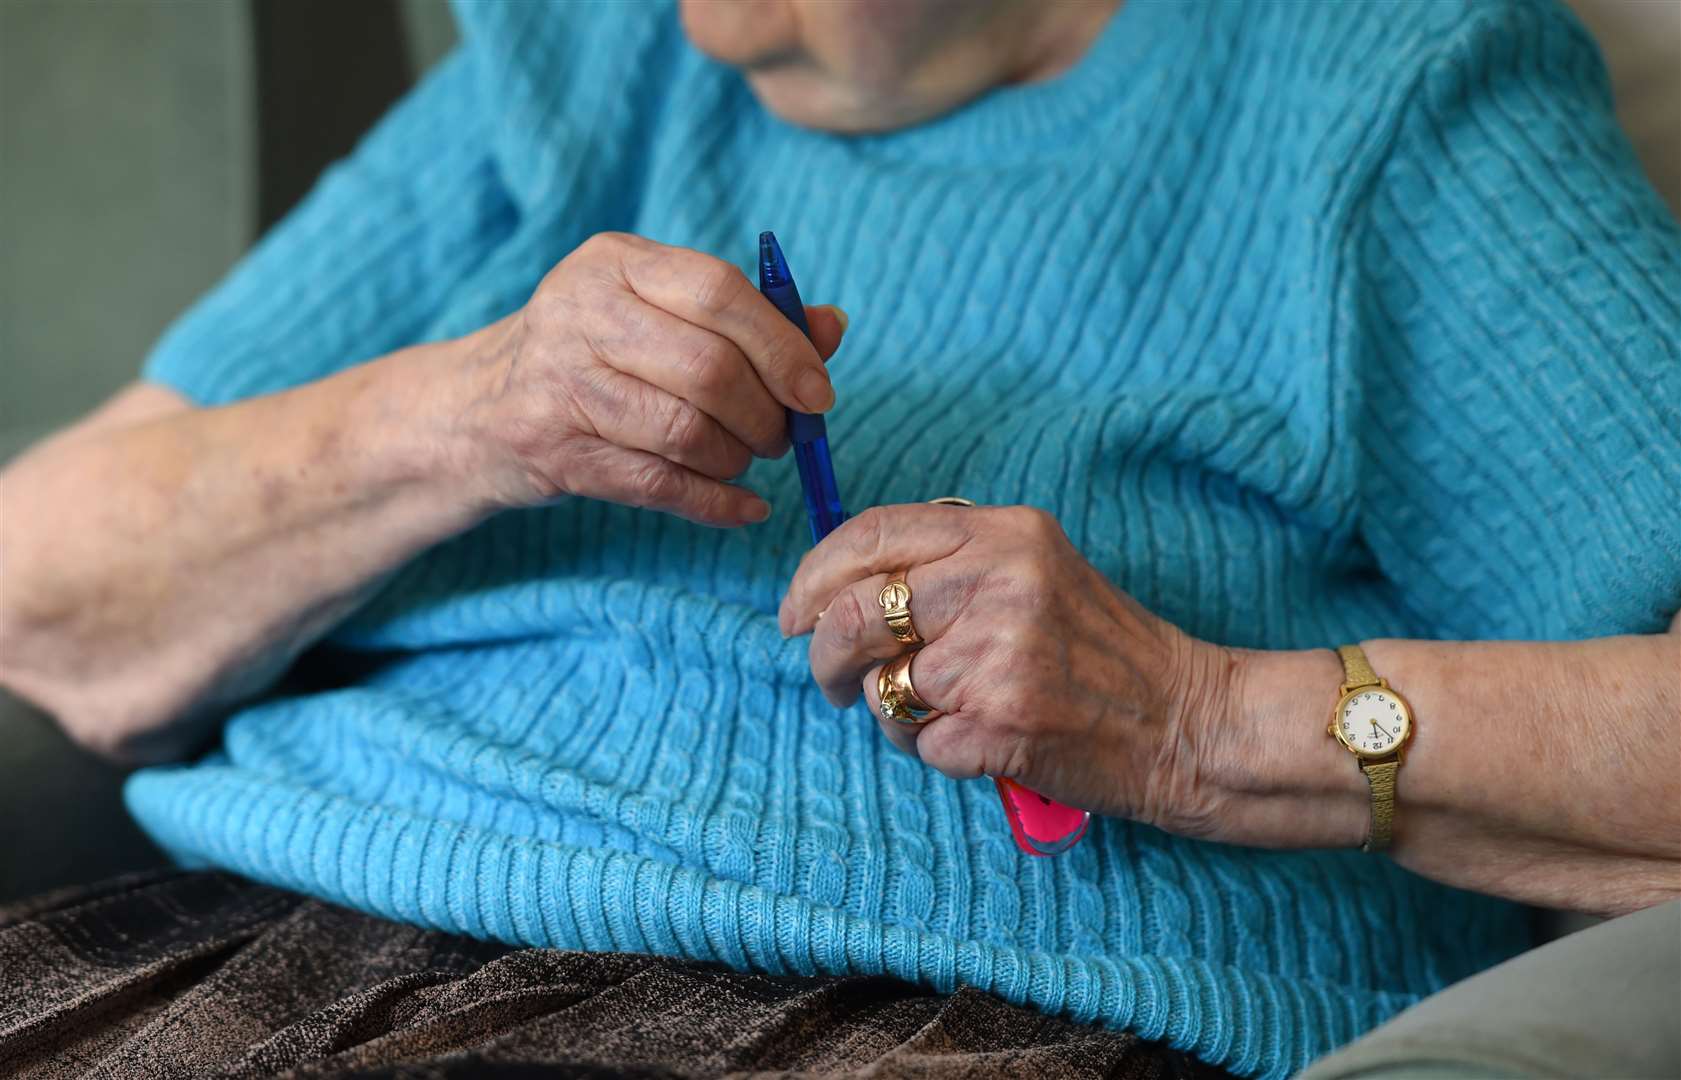 The agency provides care to people living at their own homes. Picture: PA